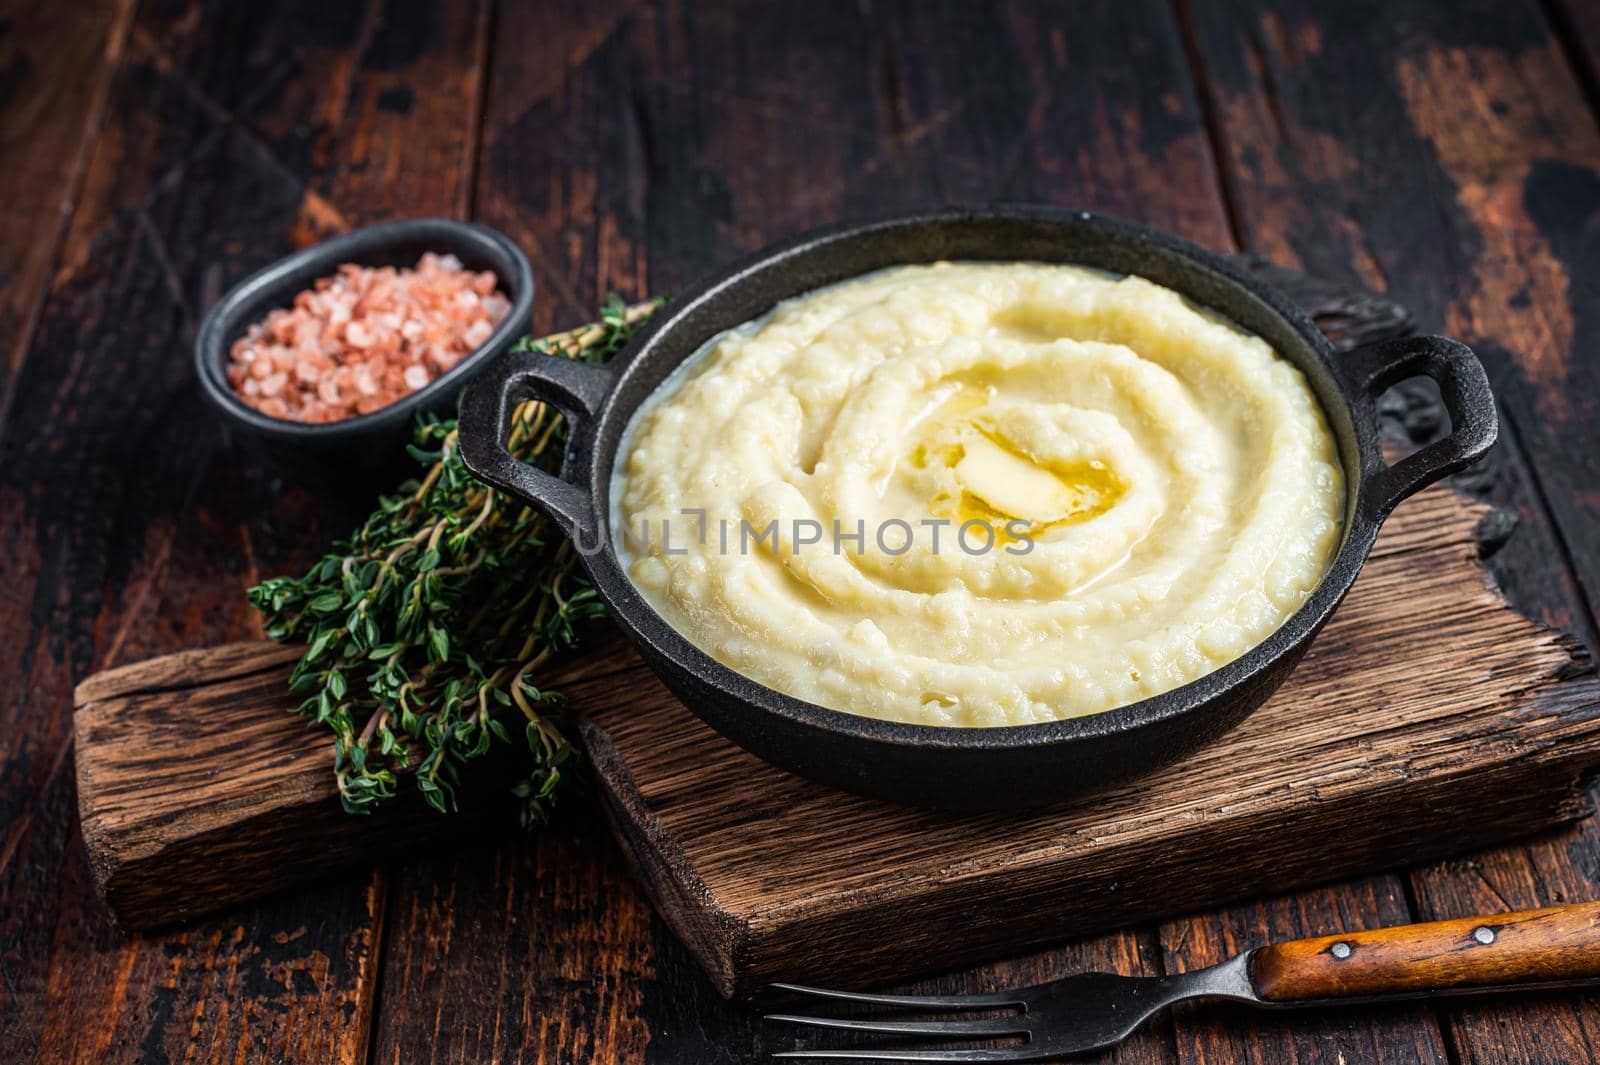 Mashed potatoes in a pan on wooden rustic table. Wooden background. Top view by Composter